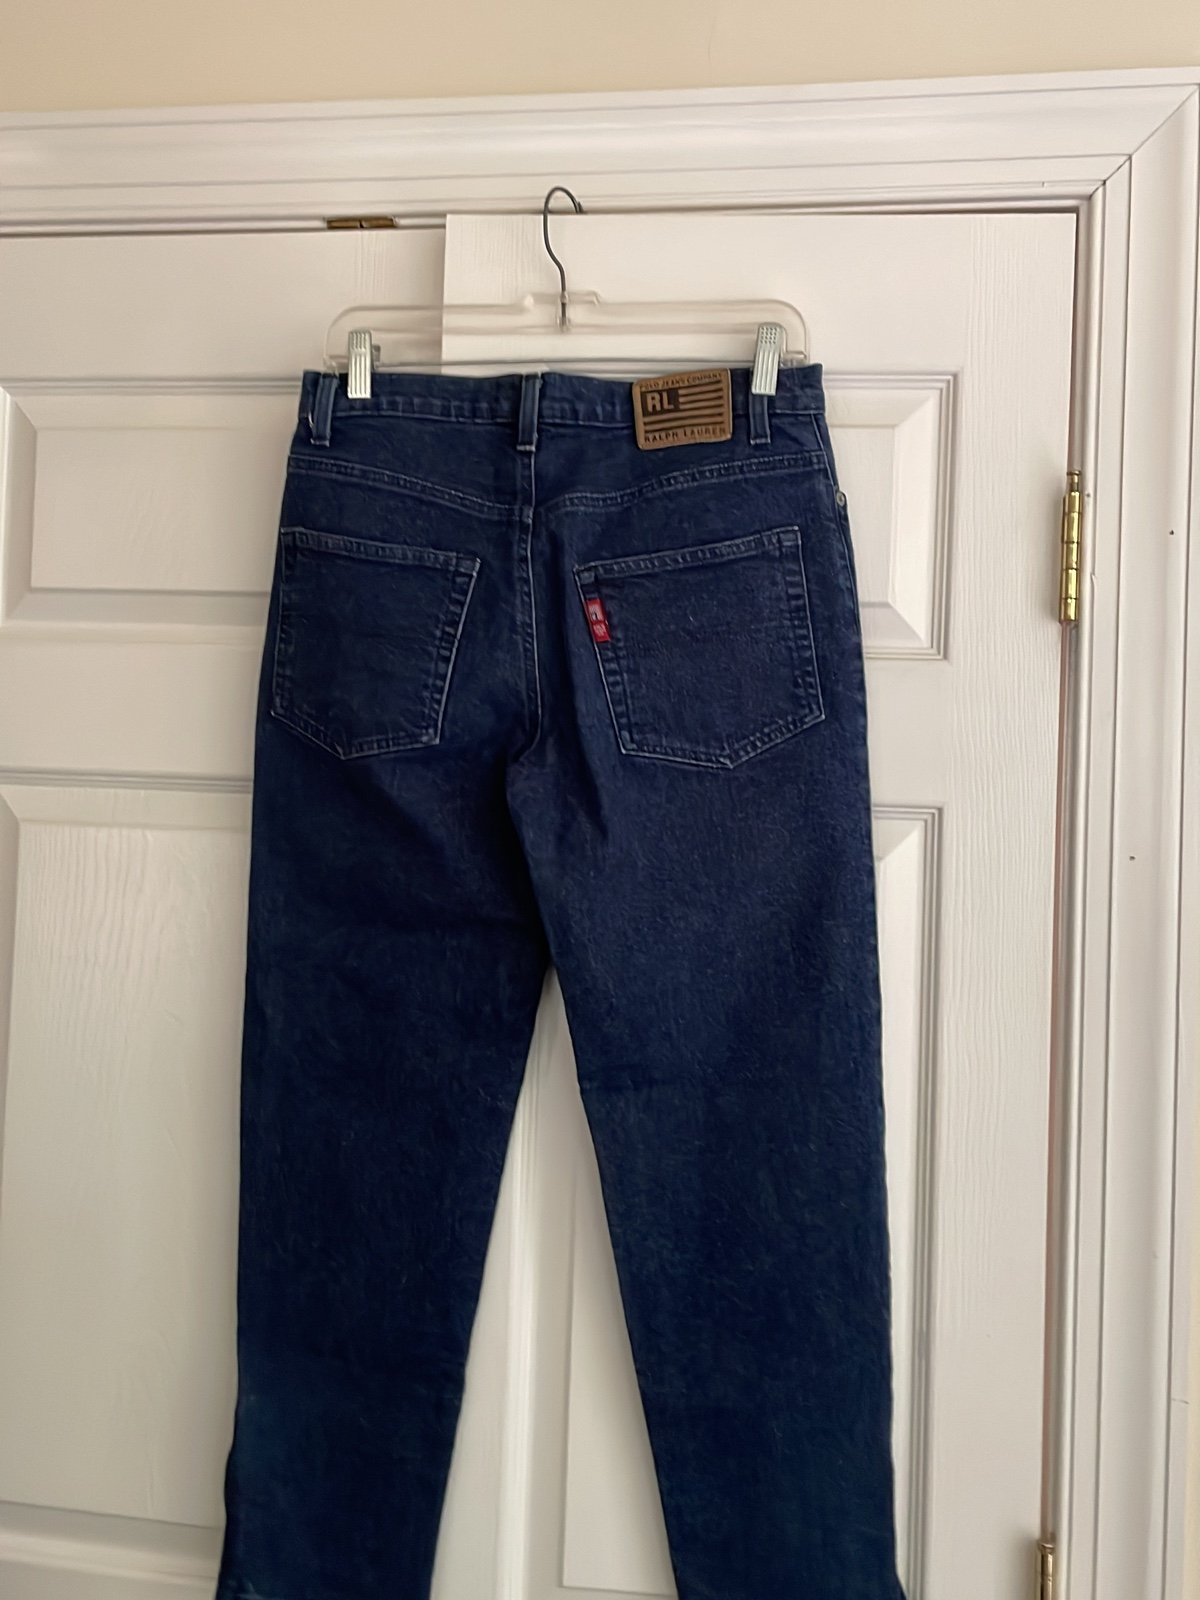 floor price Polo Ralph Lauren jeans nVdEb7wK3 just for you